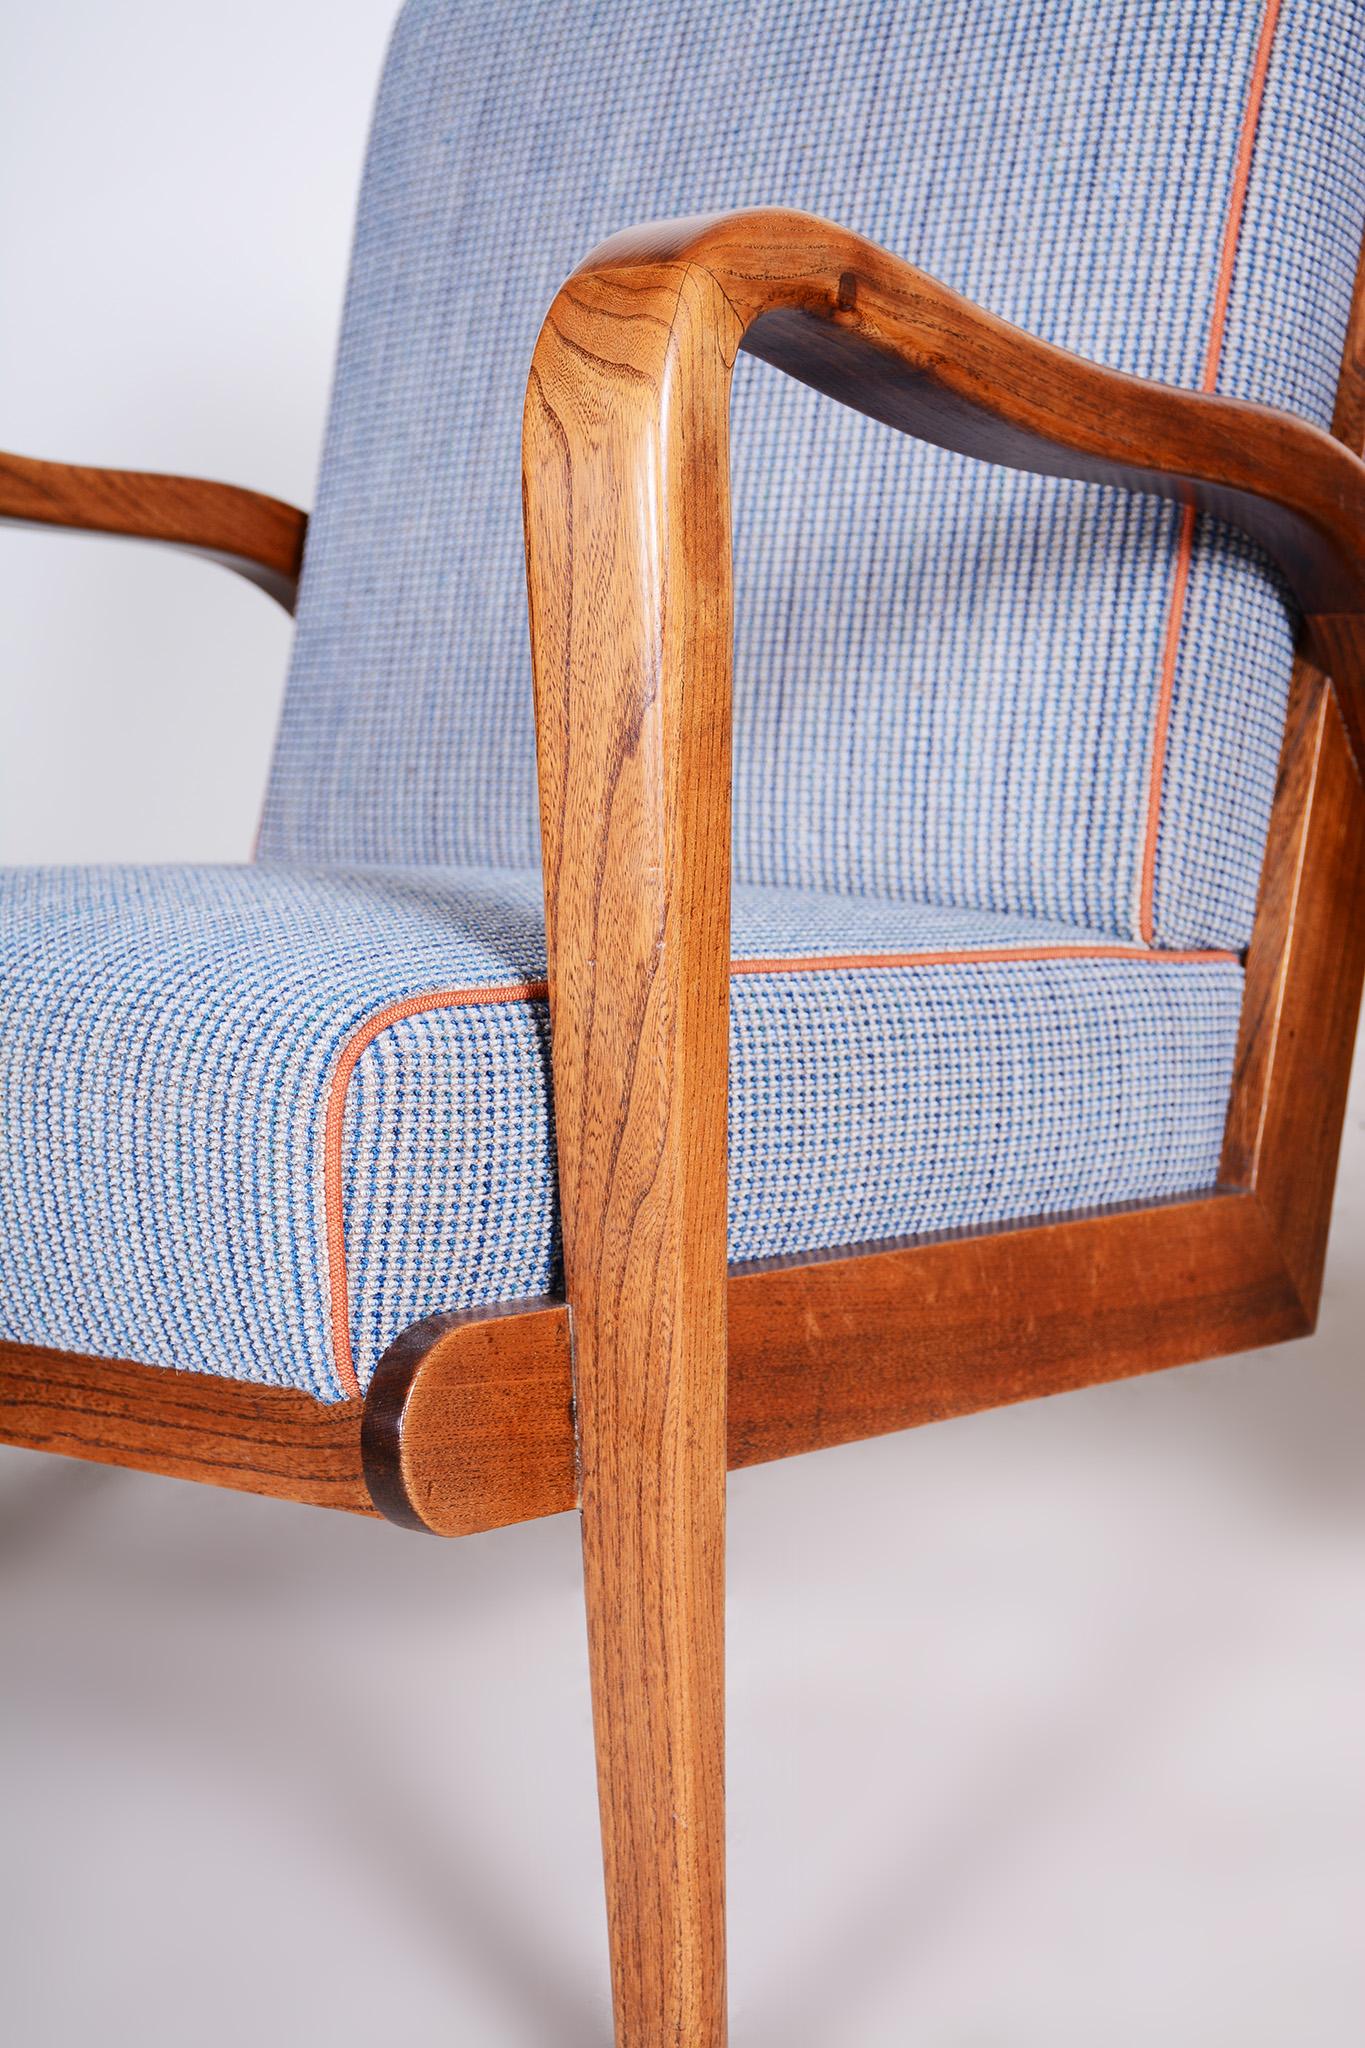 Ash Mid Century Armchairs Made in Czechia '40s, by Jan Vanek, Fully Restored 3